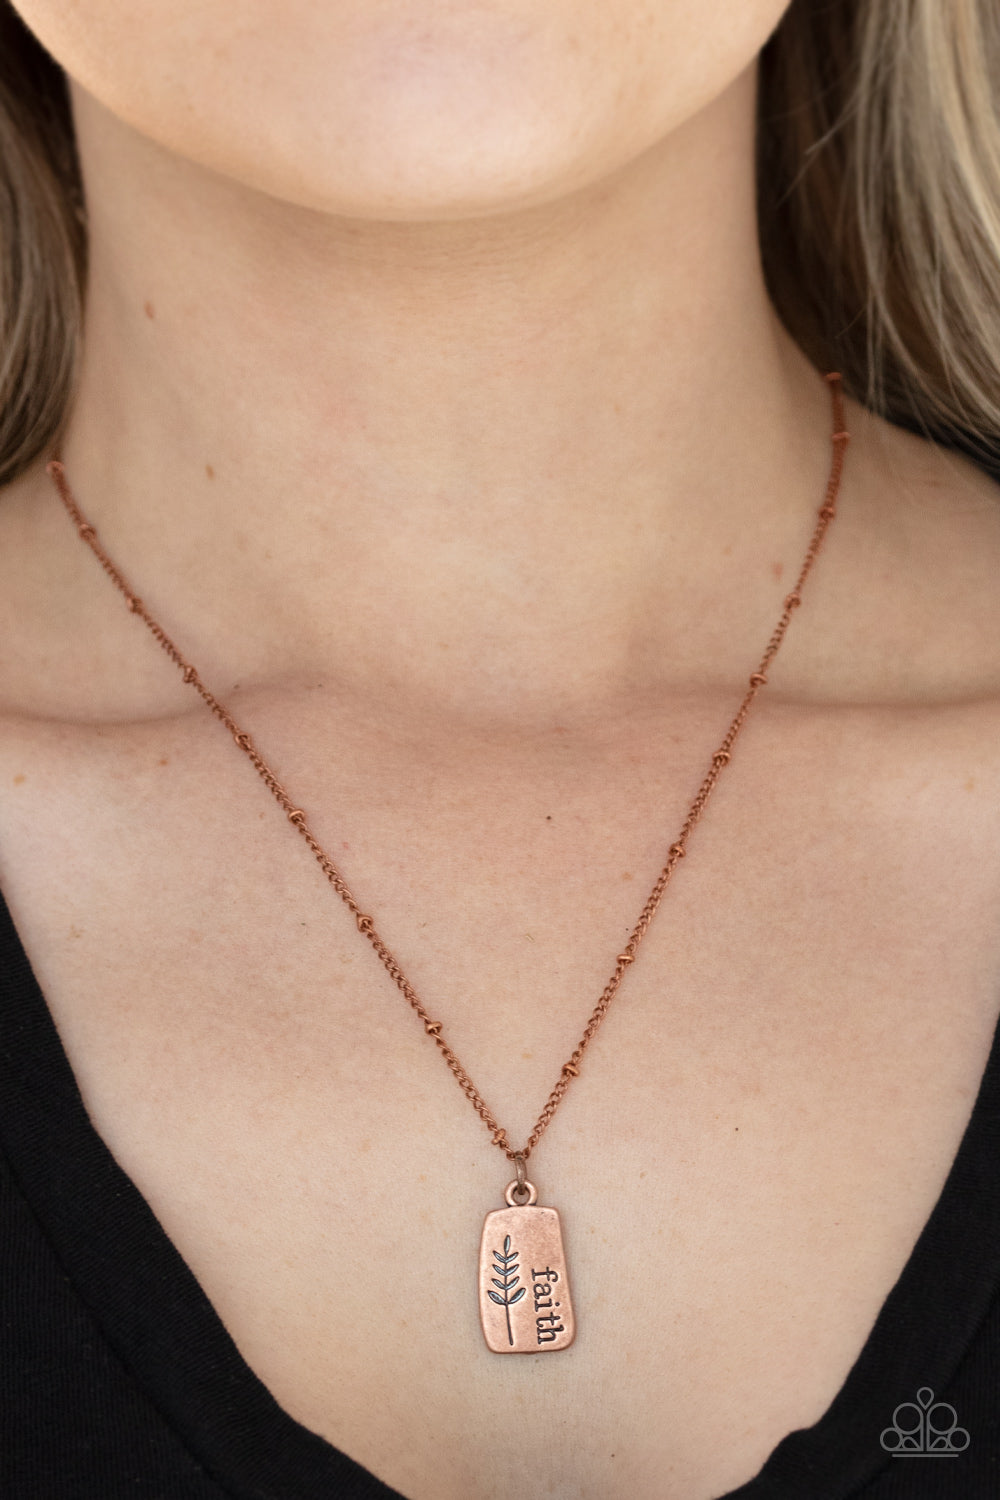 Paparazzi Faith Over Fear - Copper - Necklace & Earrings - $5 Jewelry with Ashley Swint